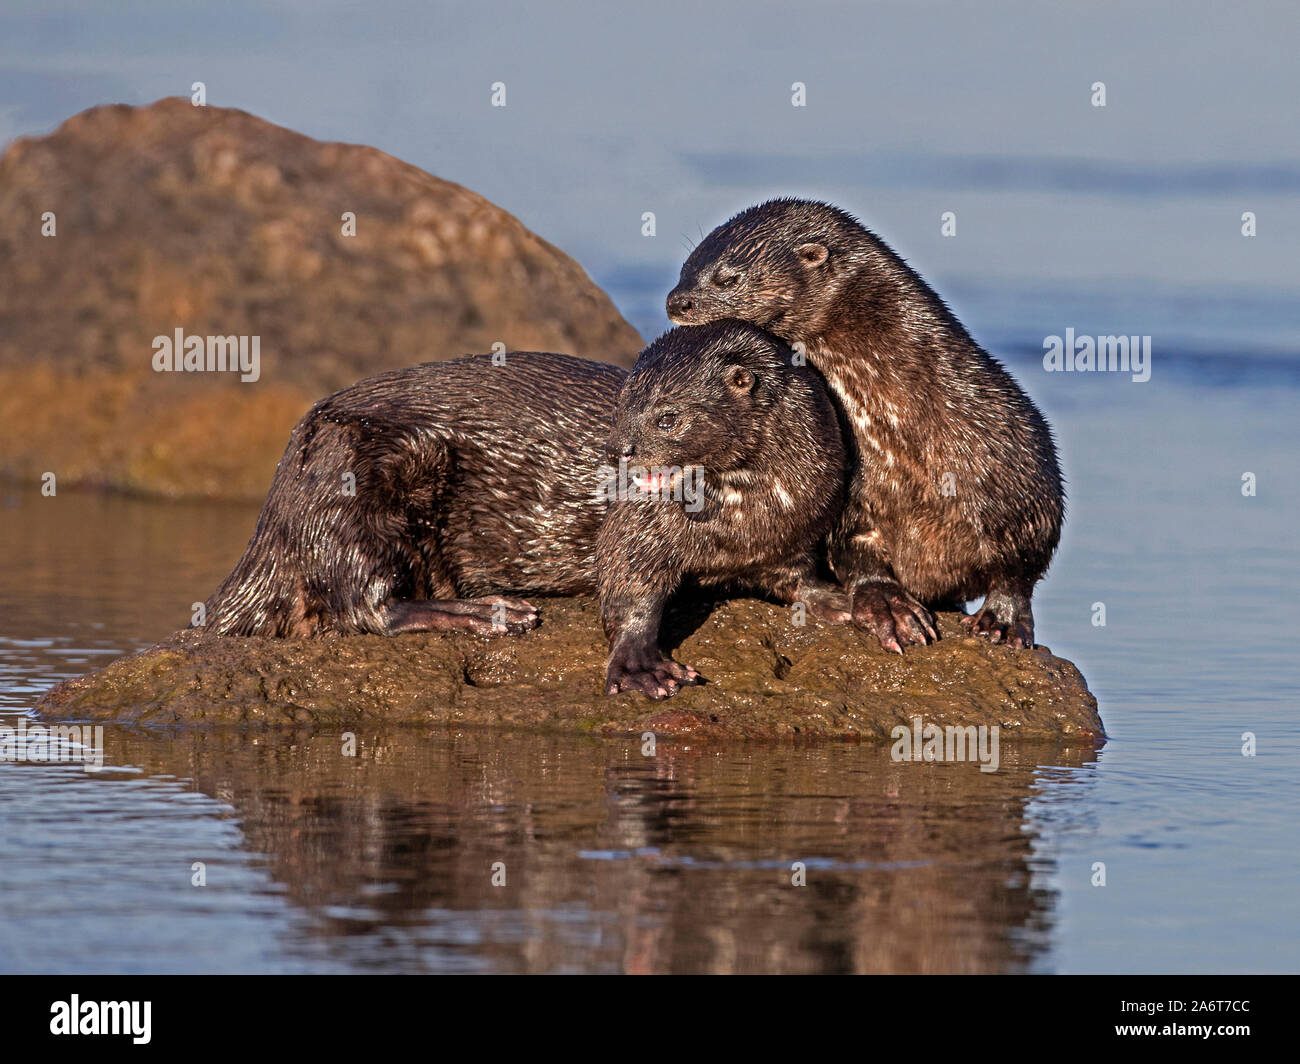 Paisr of spotted-necked otters on rock Stock Photo